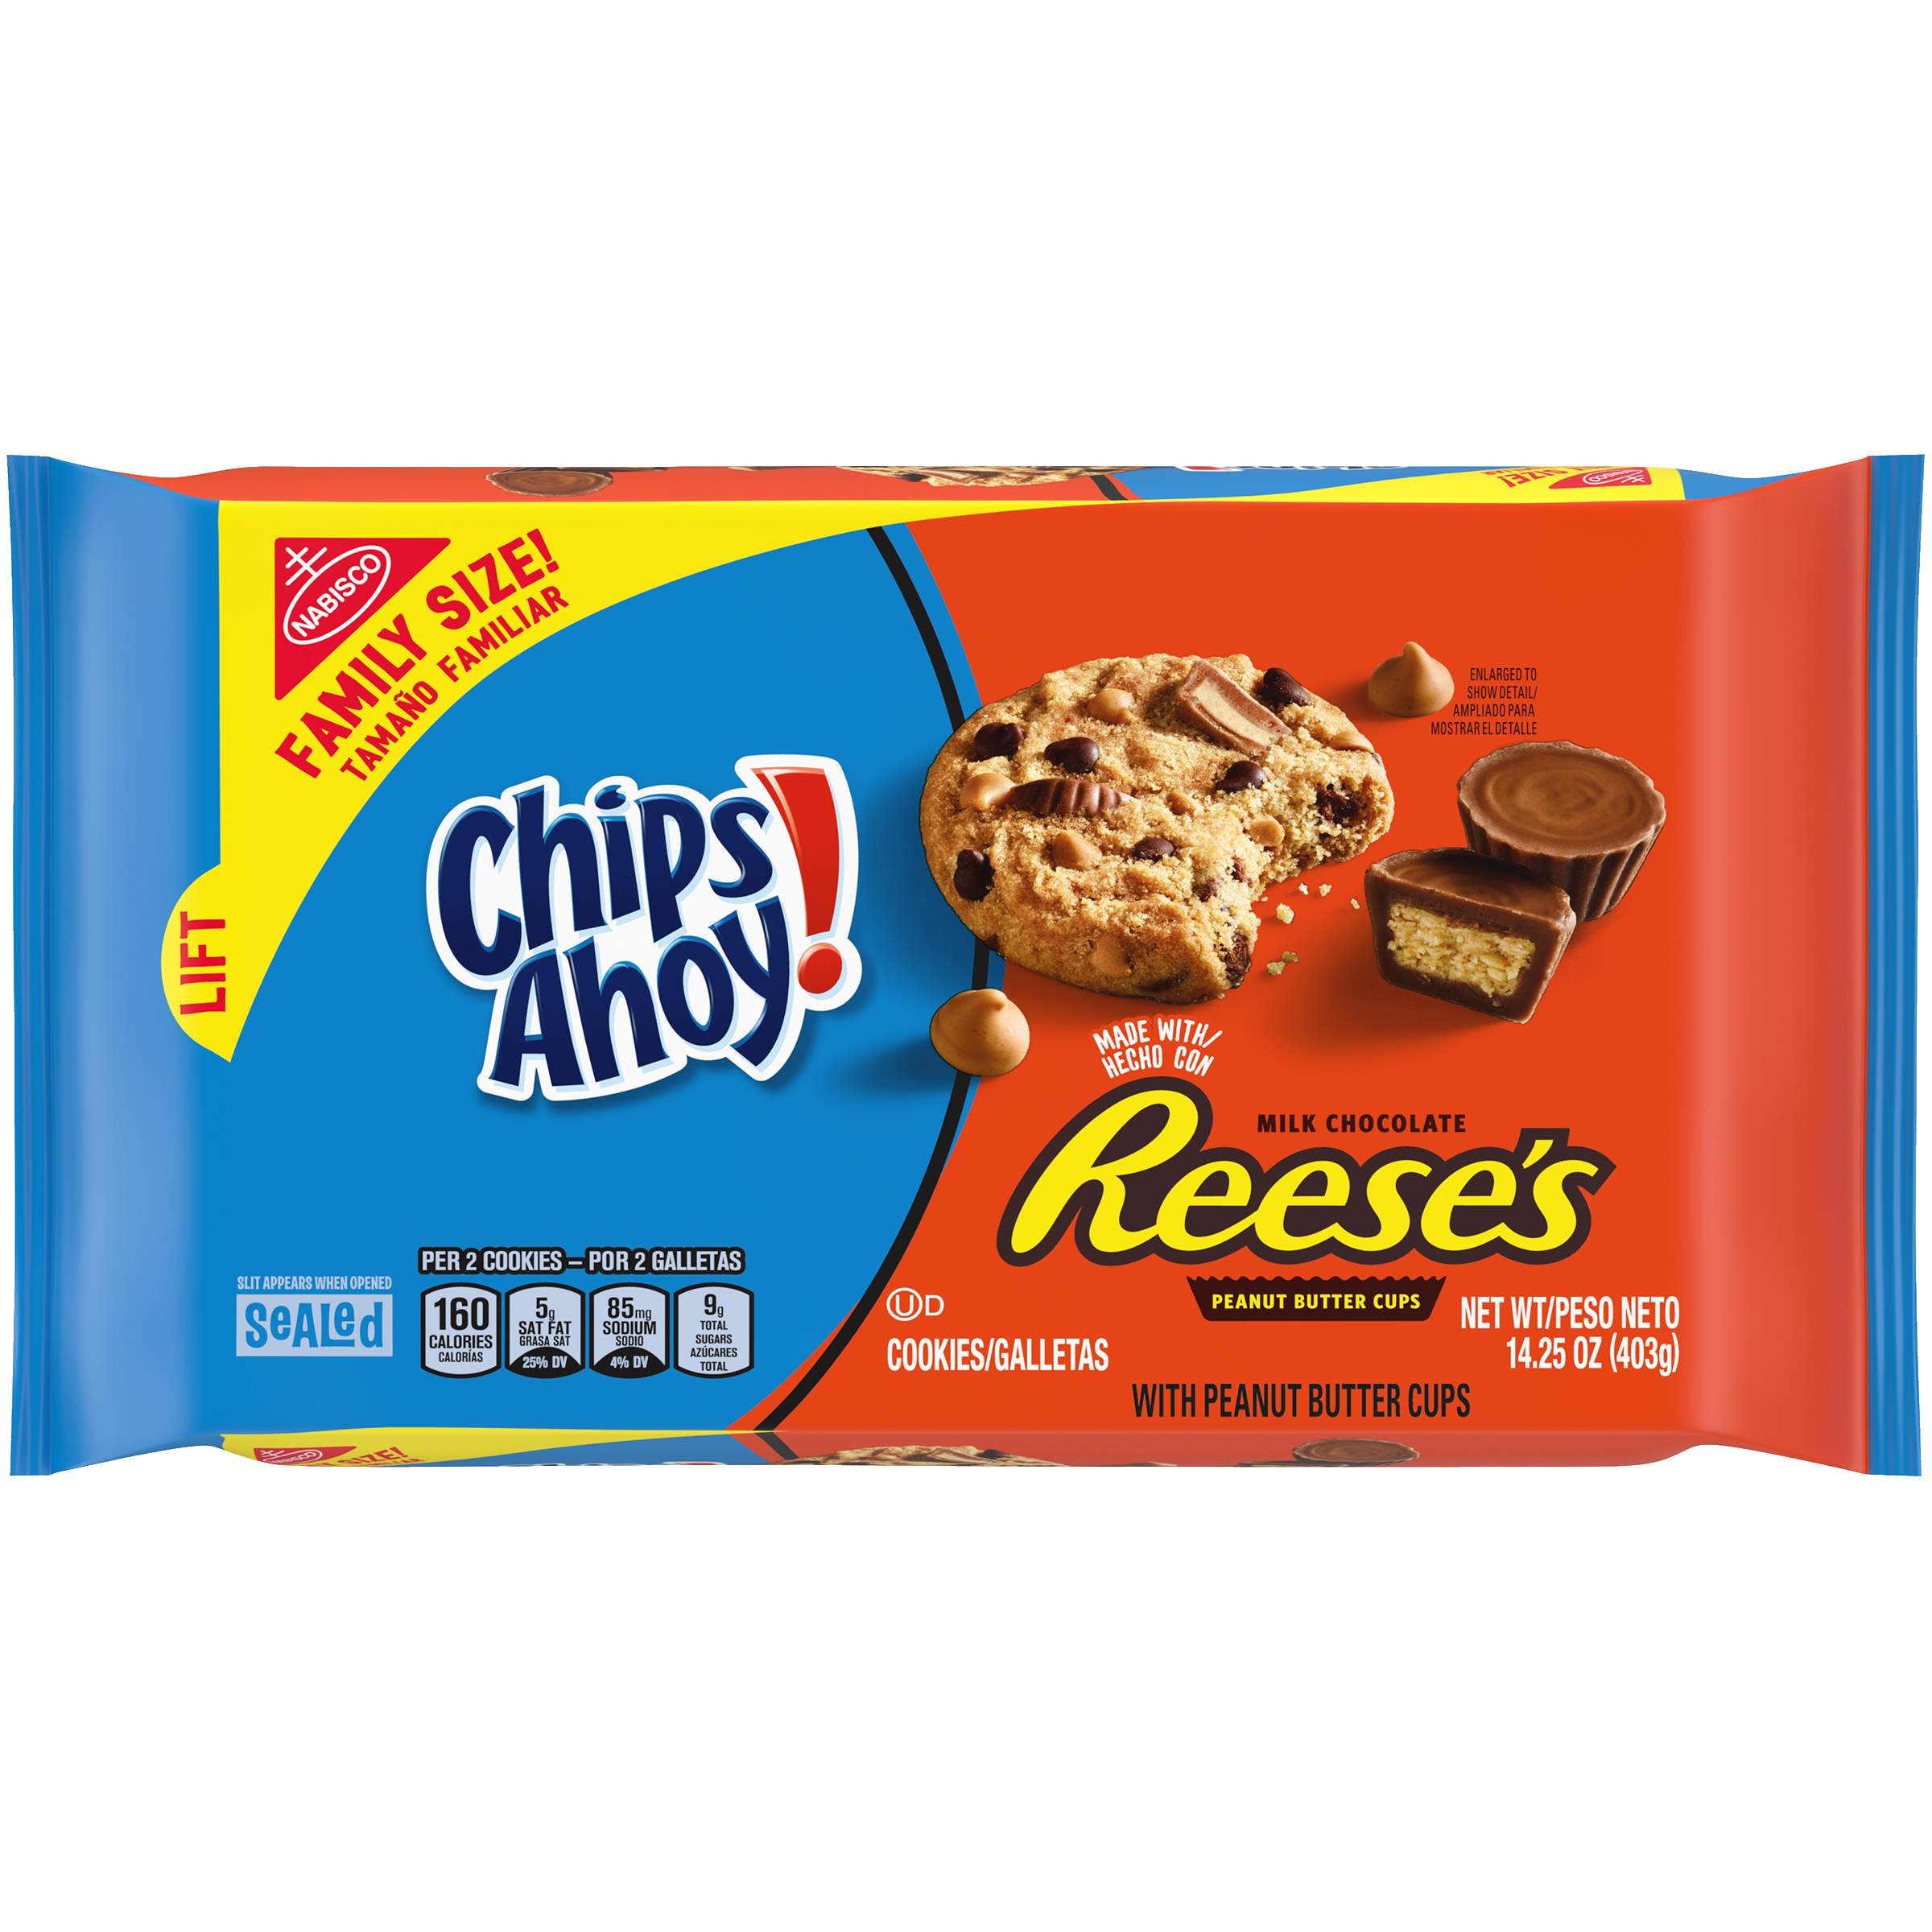 CHIPS AHOY! Cookies with Reese’s Peanut Butter Cups, Family Size, 14.25 oz-thumbnail-2